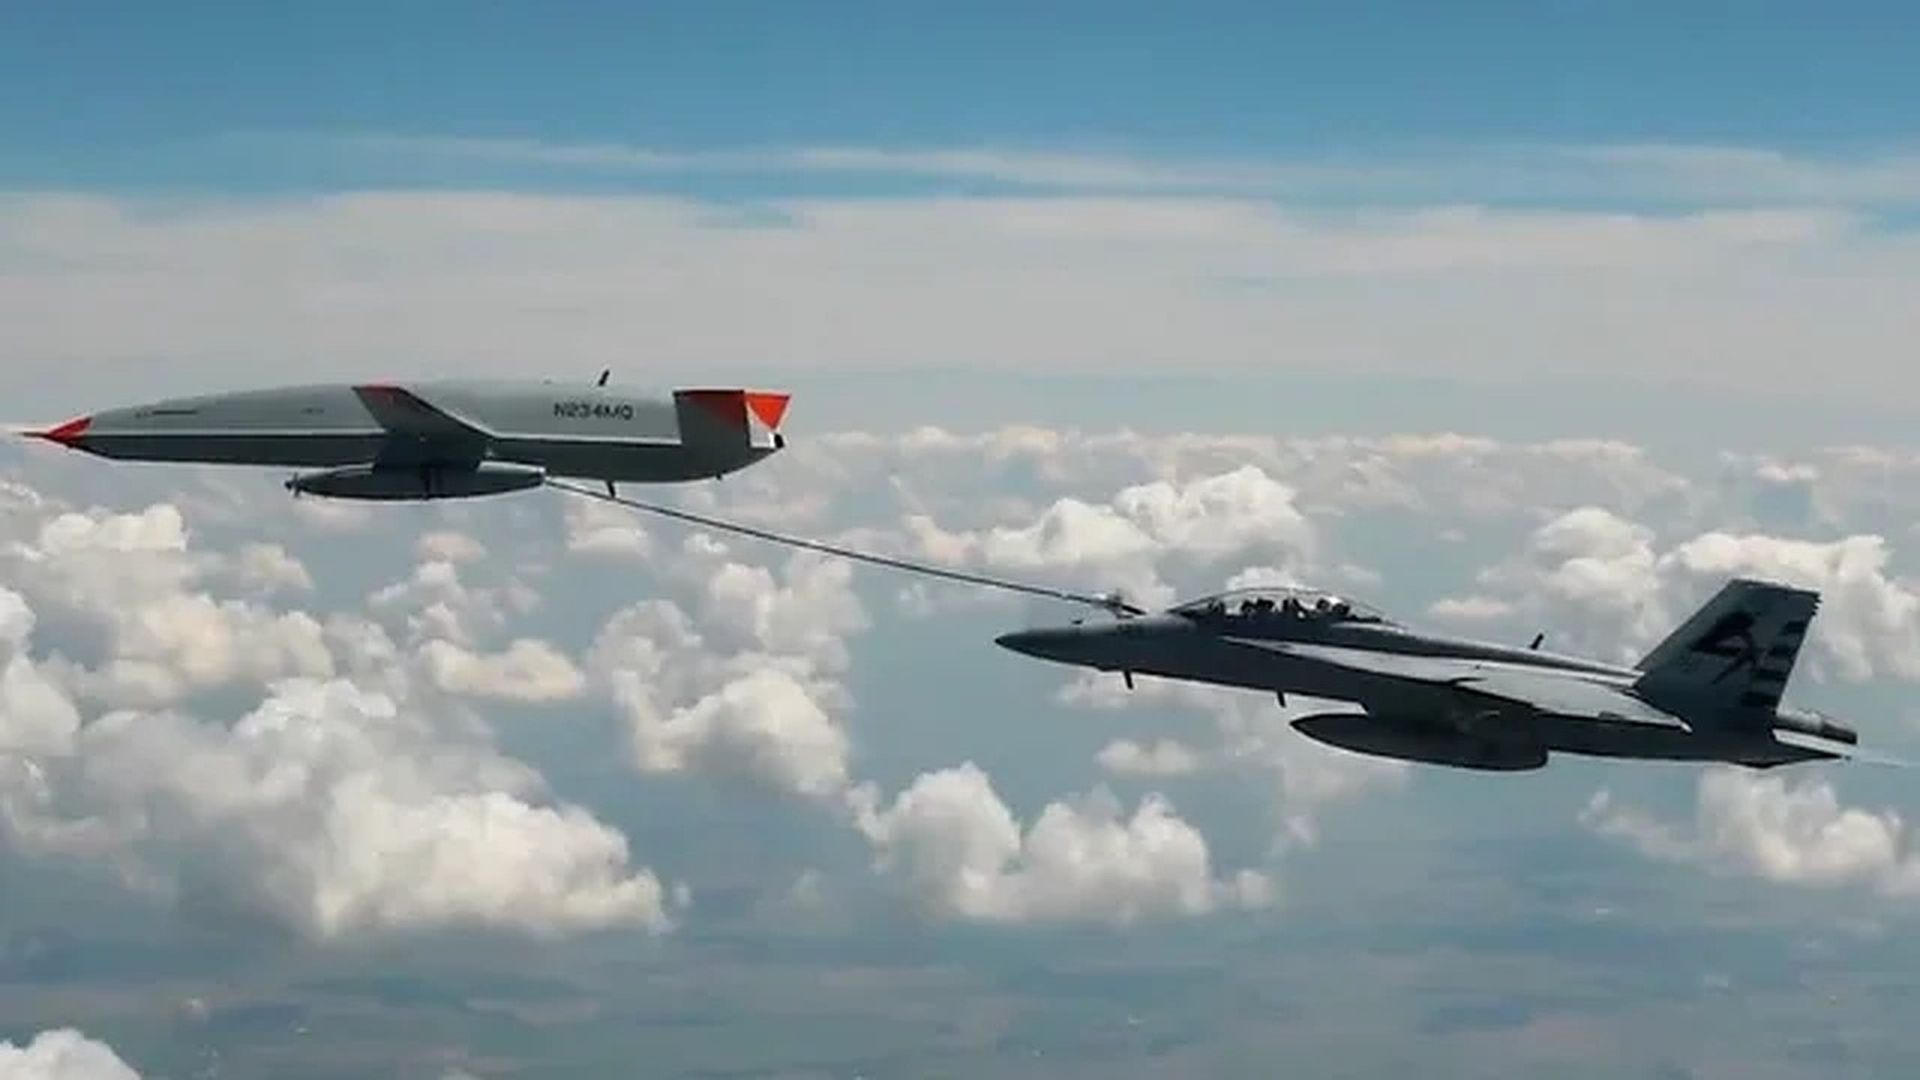 An unmanned aircraft refueling a Navy fighter jet in midair for the first time.